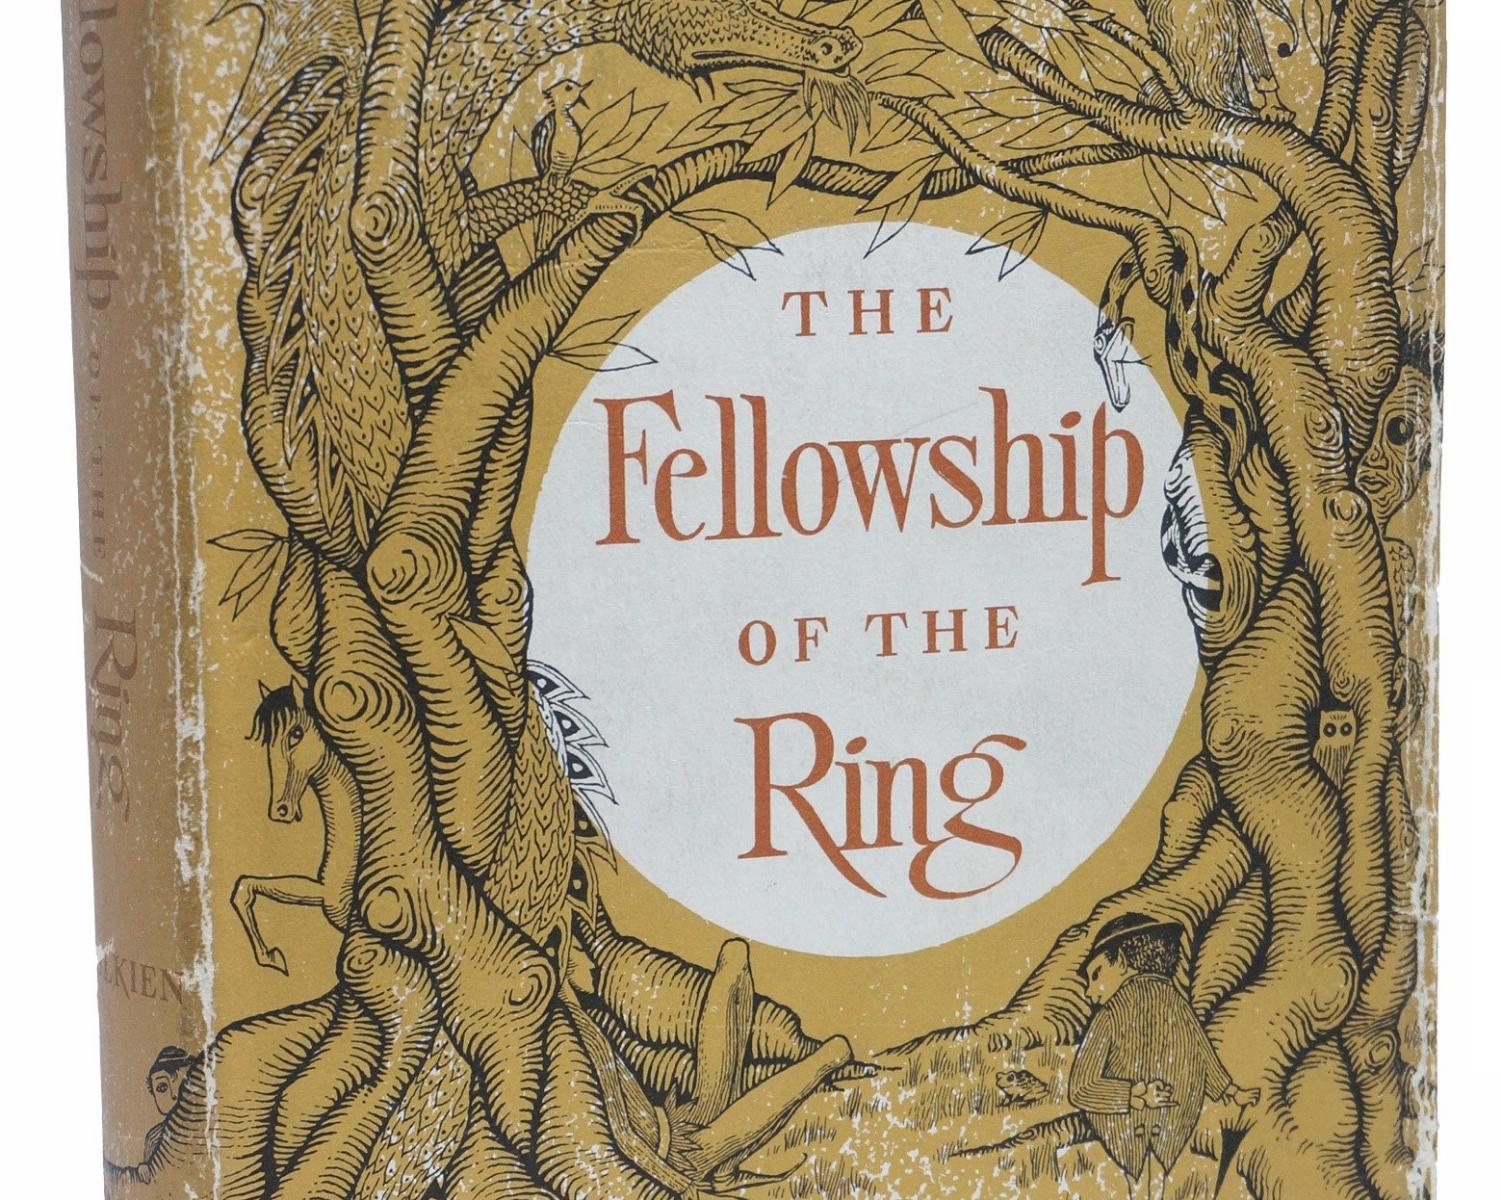 "The Fellowship of the Ring" by J.R.R. Tolkein